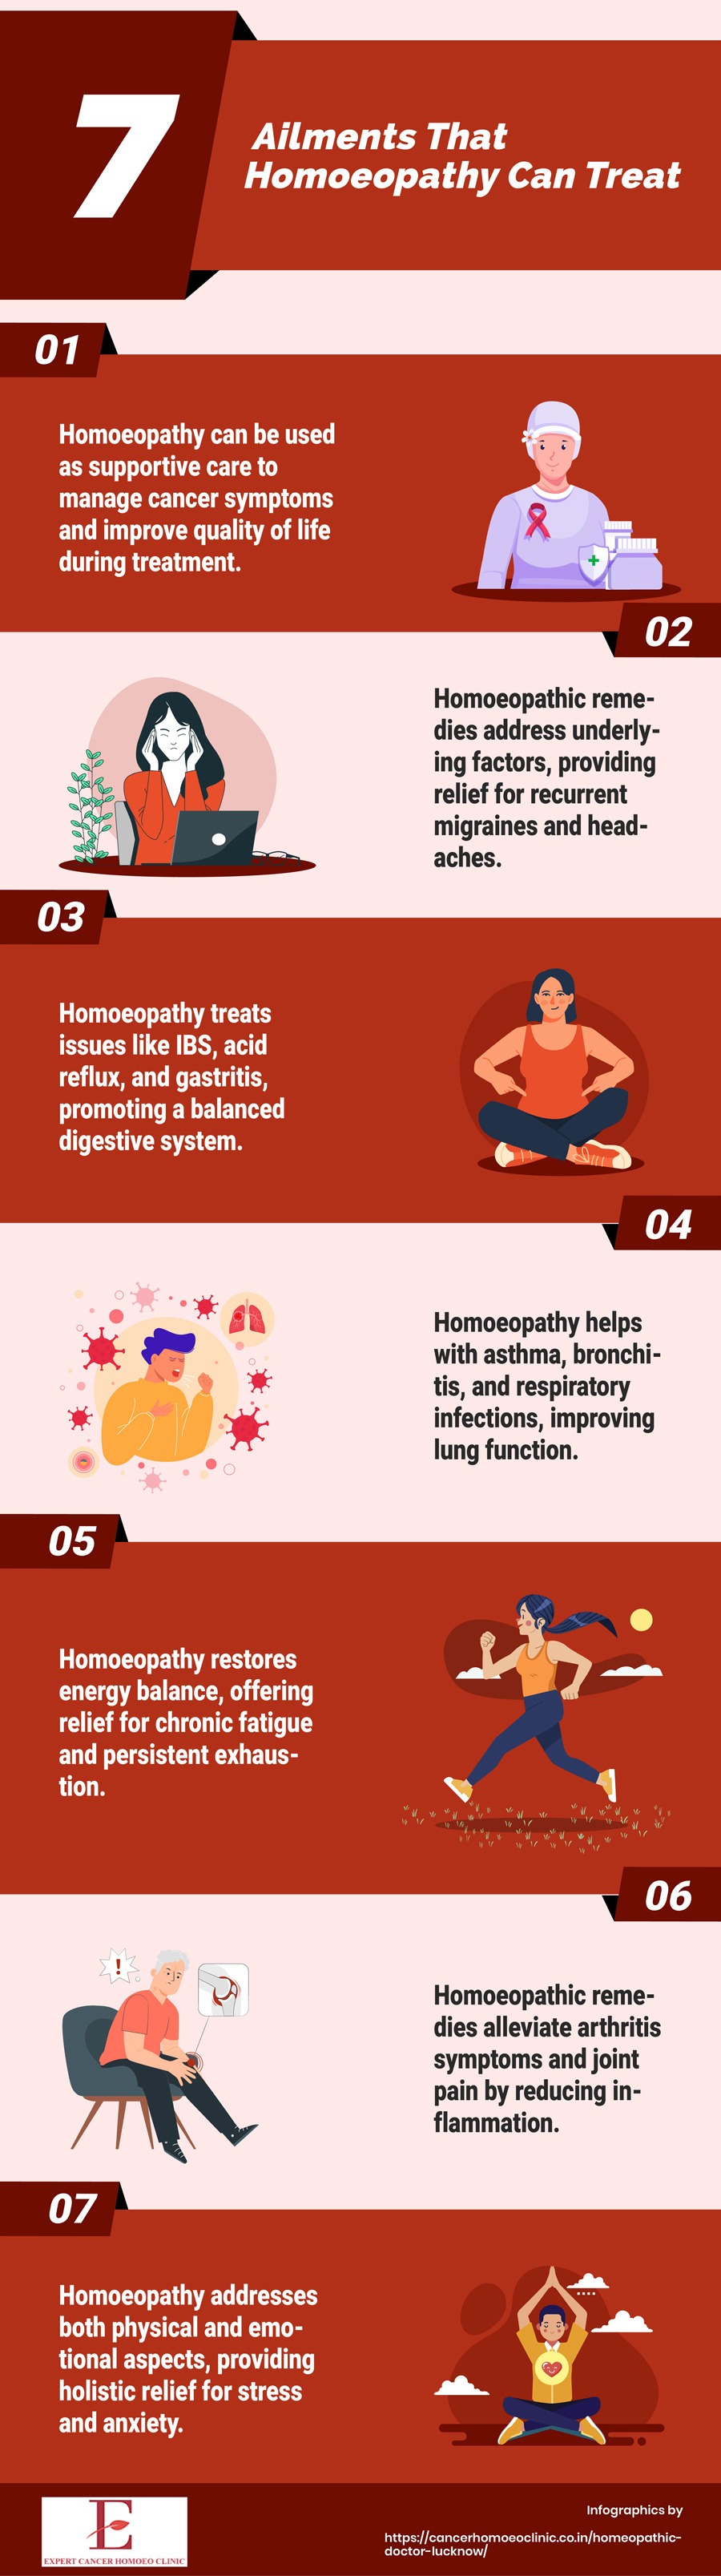 Homoeopathy Can Treat